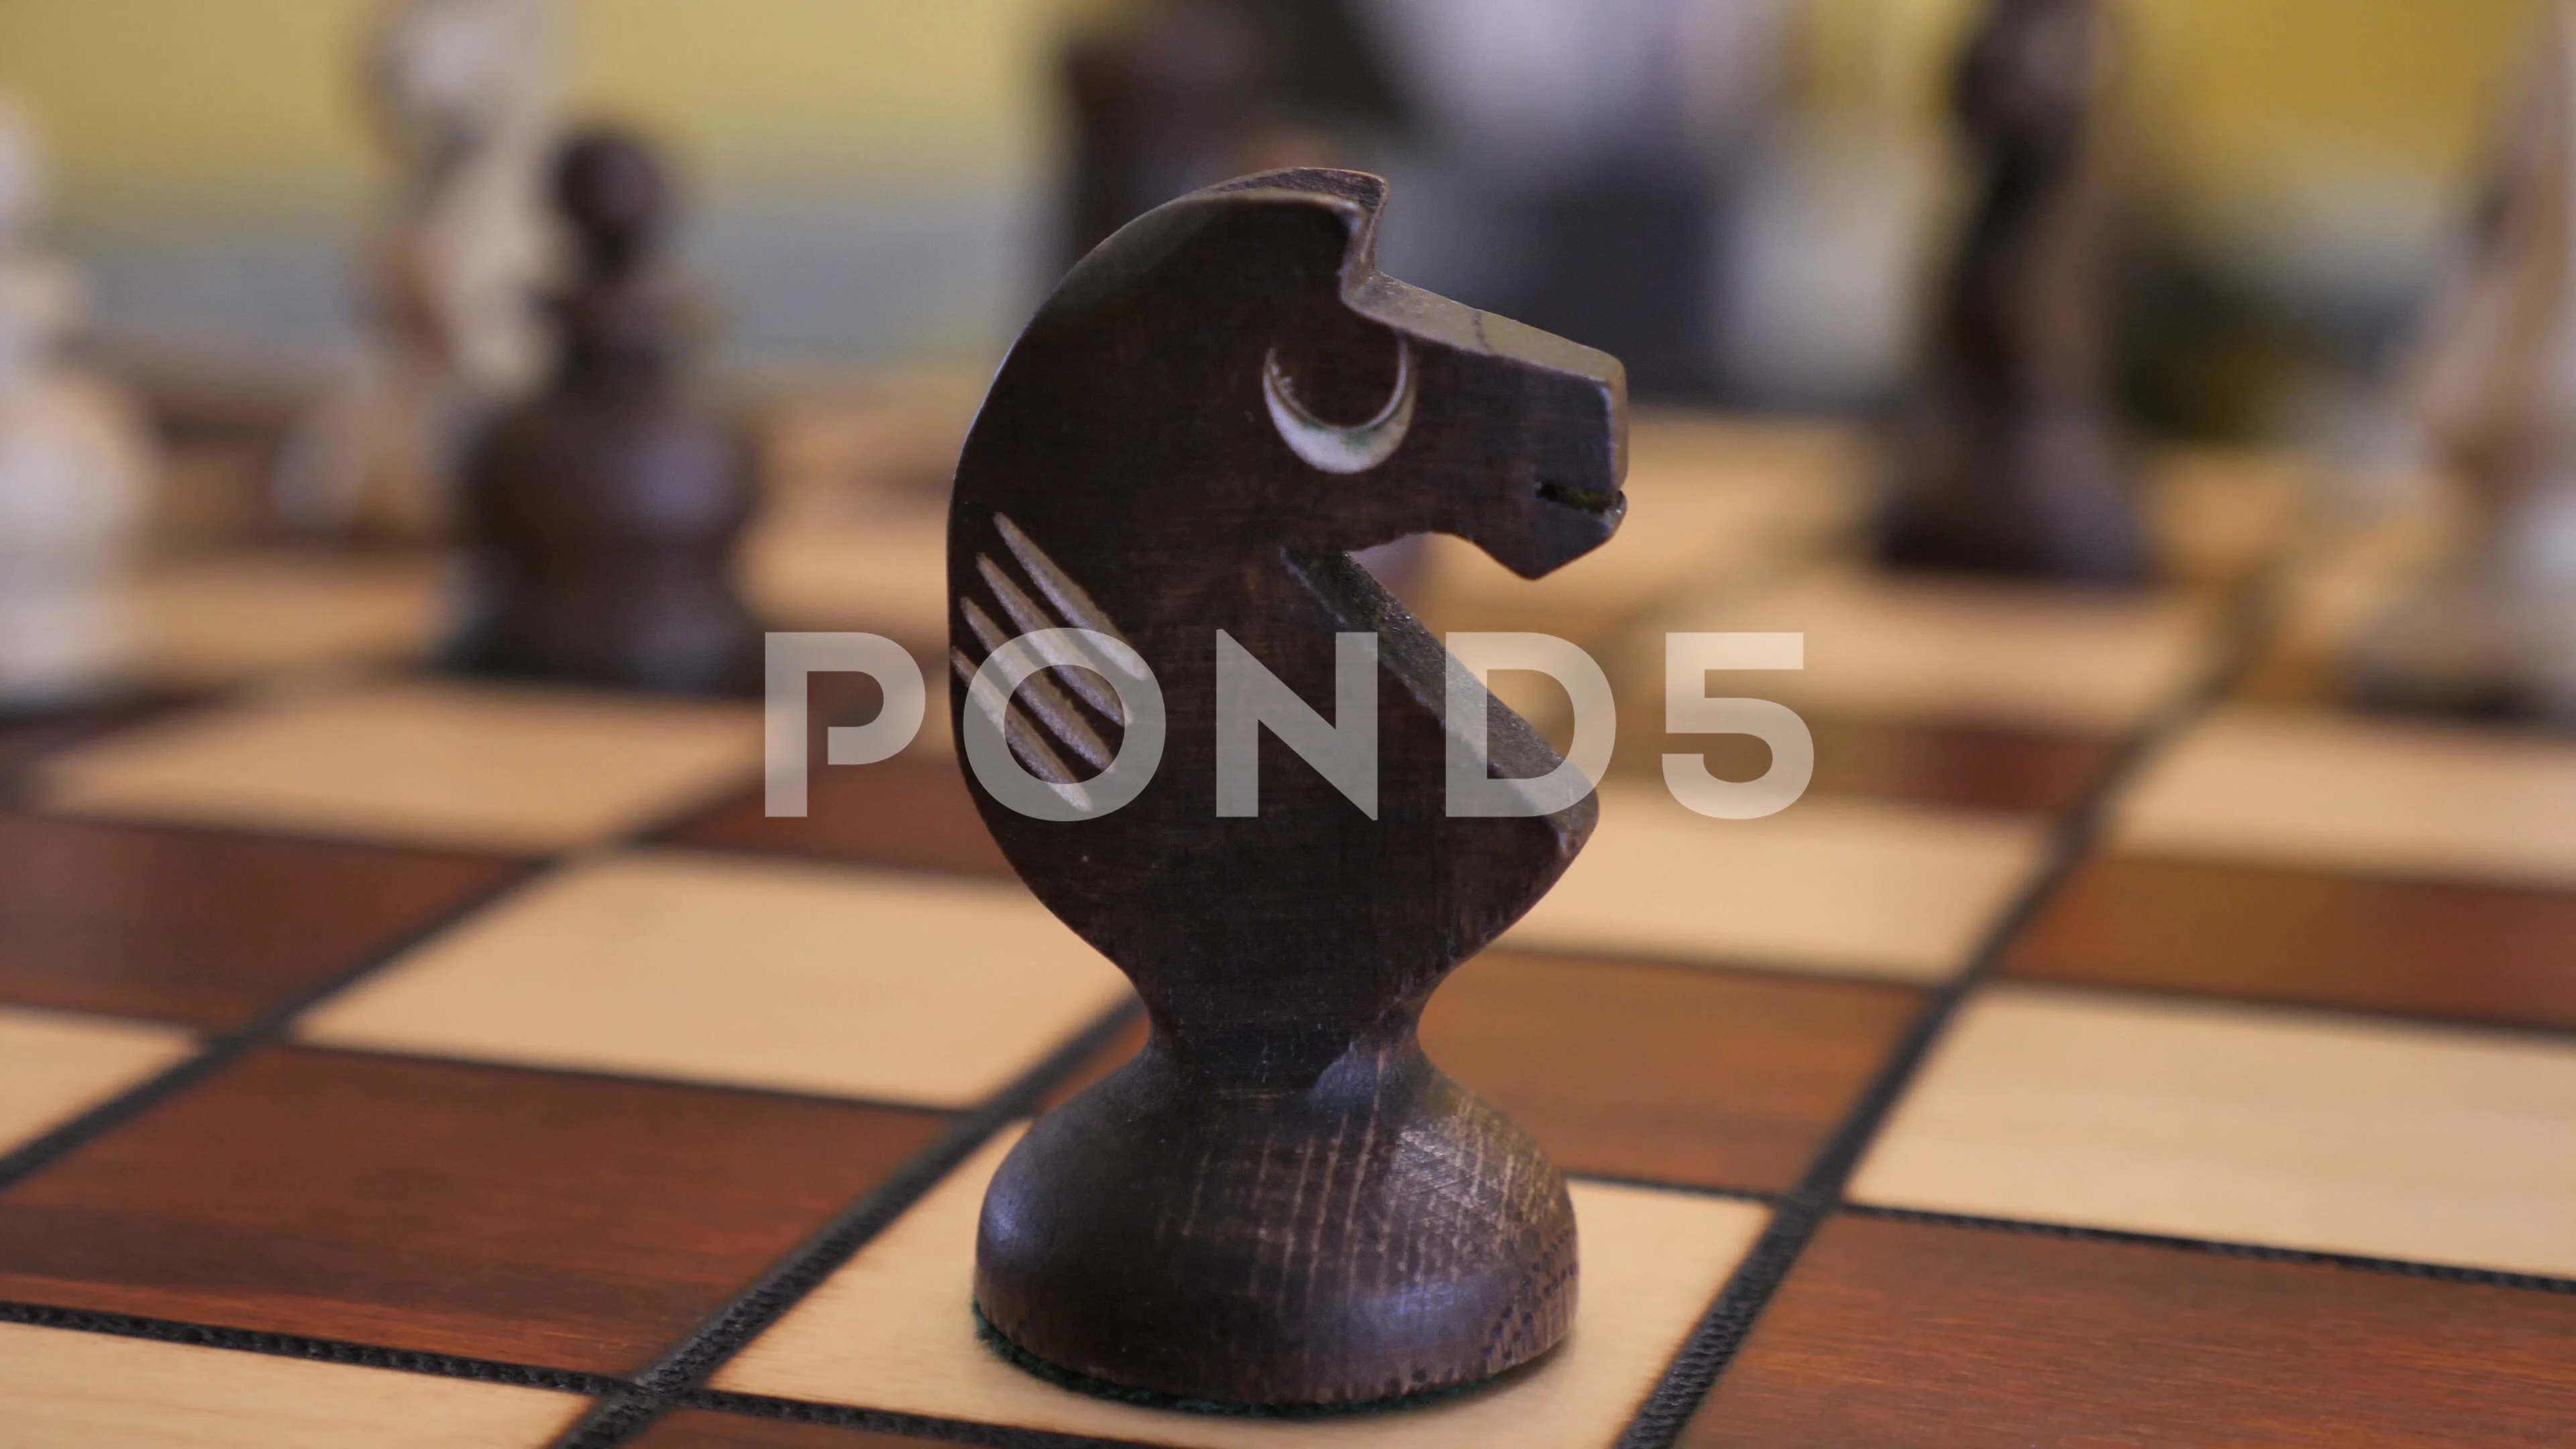 5,400+ King Chess Piece Stock Videos and Royalty-Free Footage